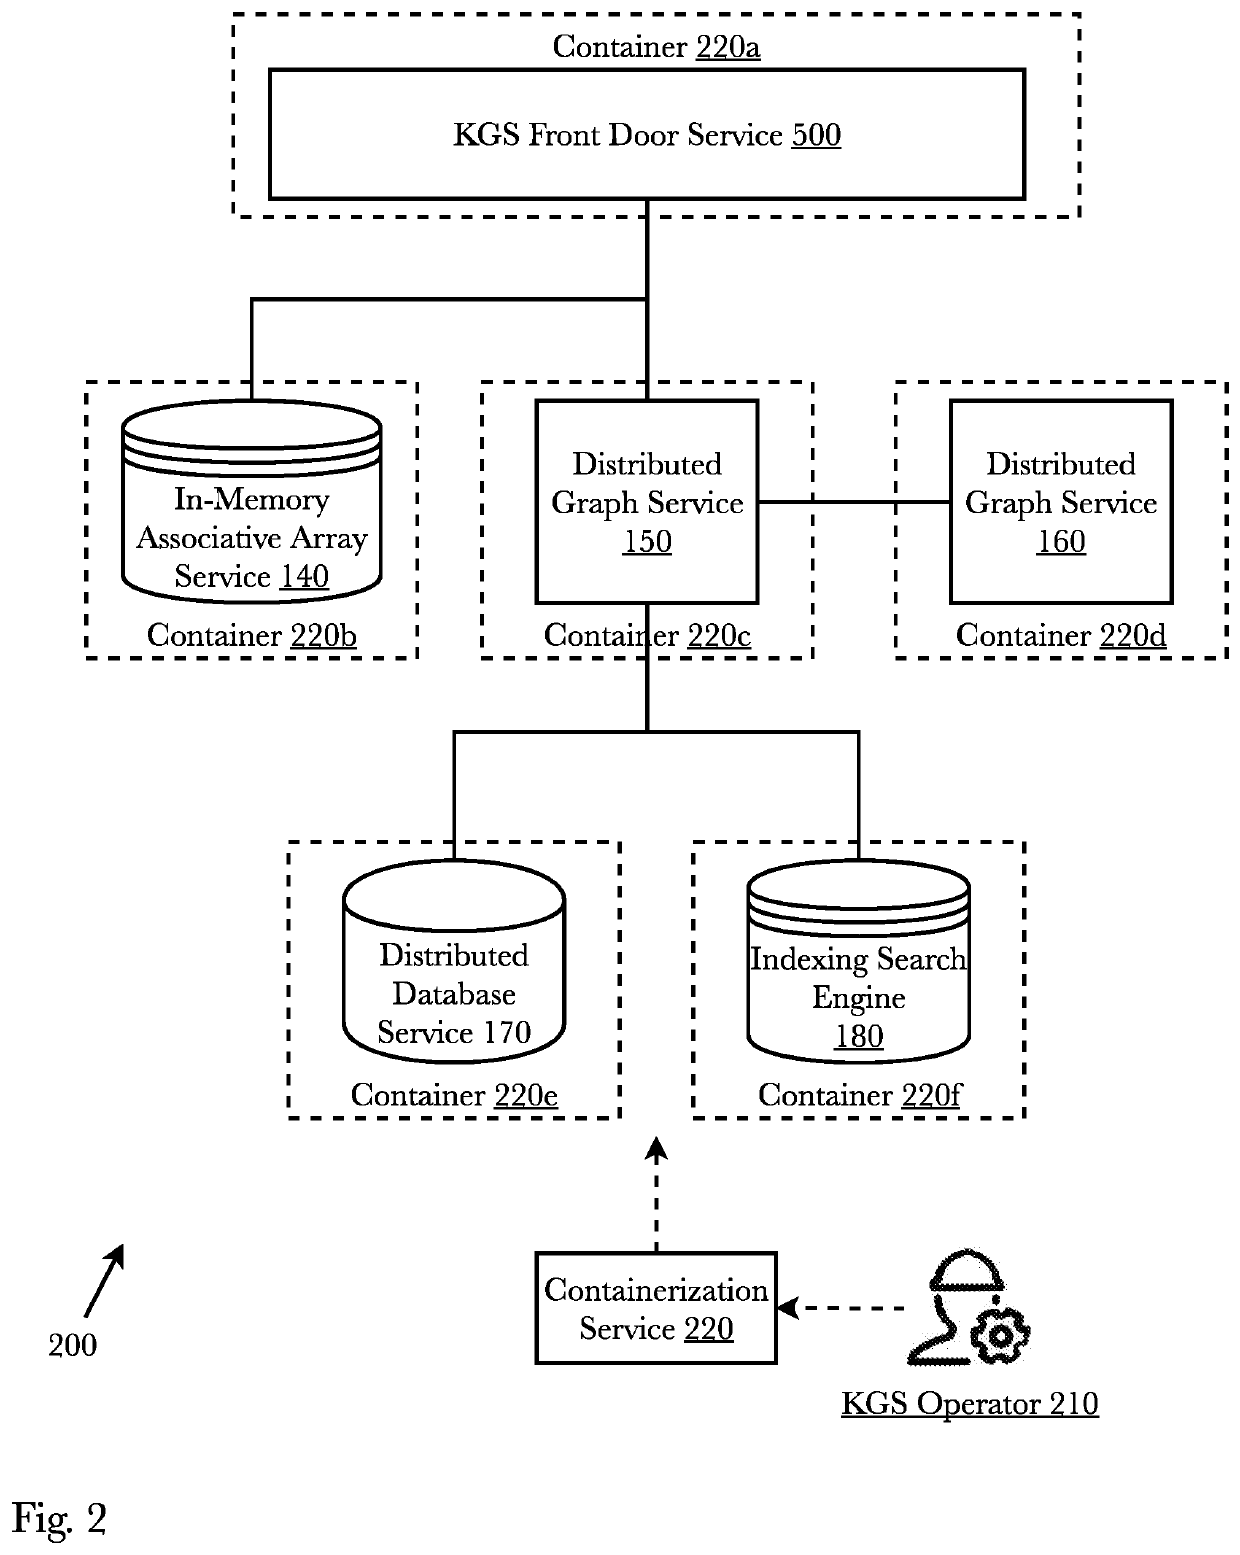 Multi-tenant knowledge graph databases with dynamic specification and enforcement of ontological data models